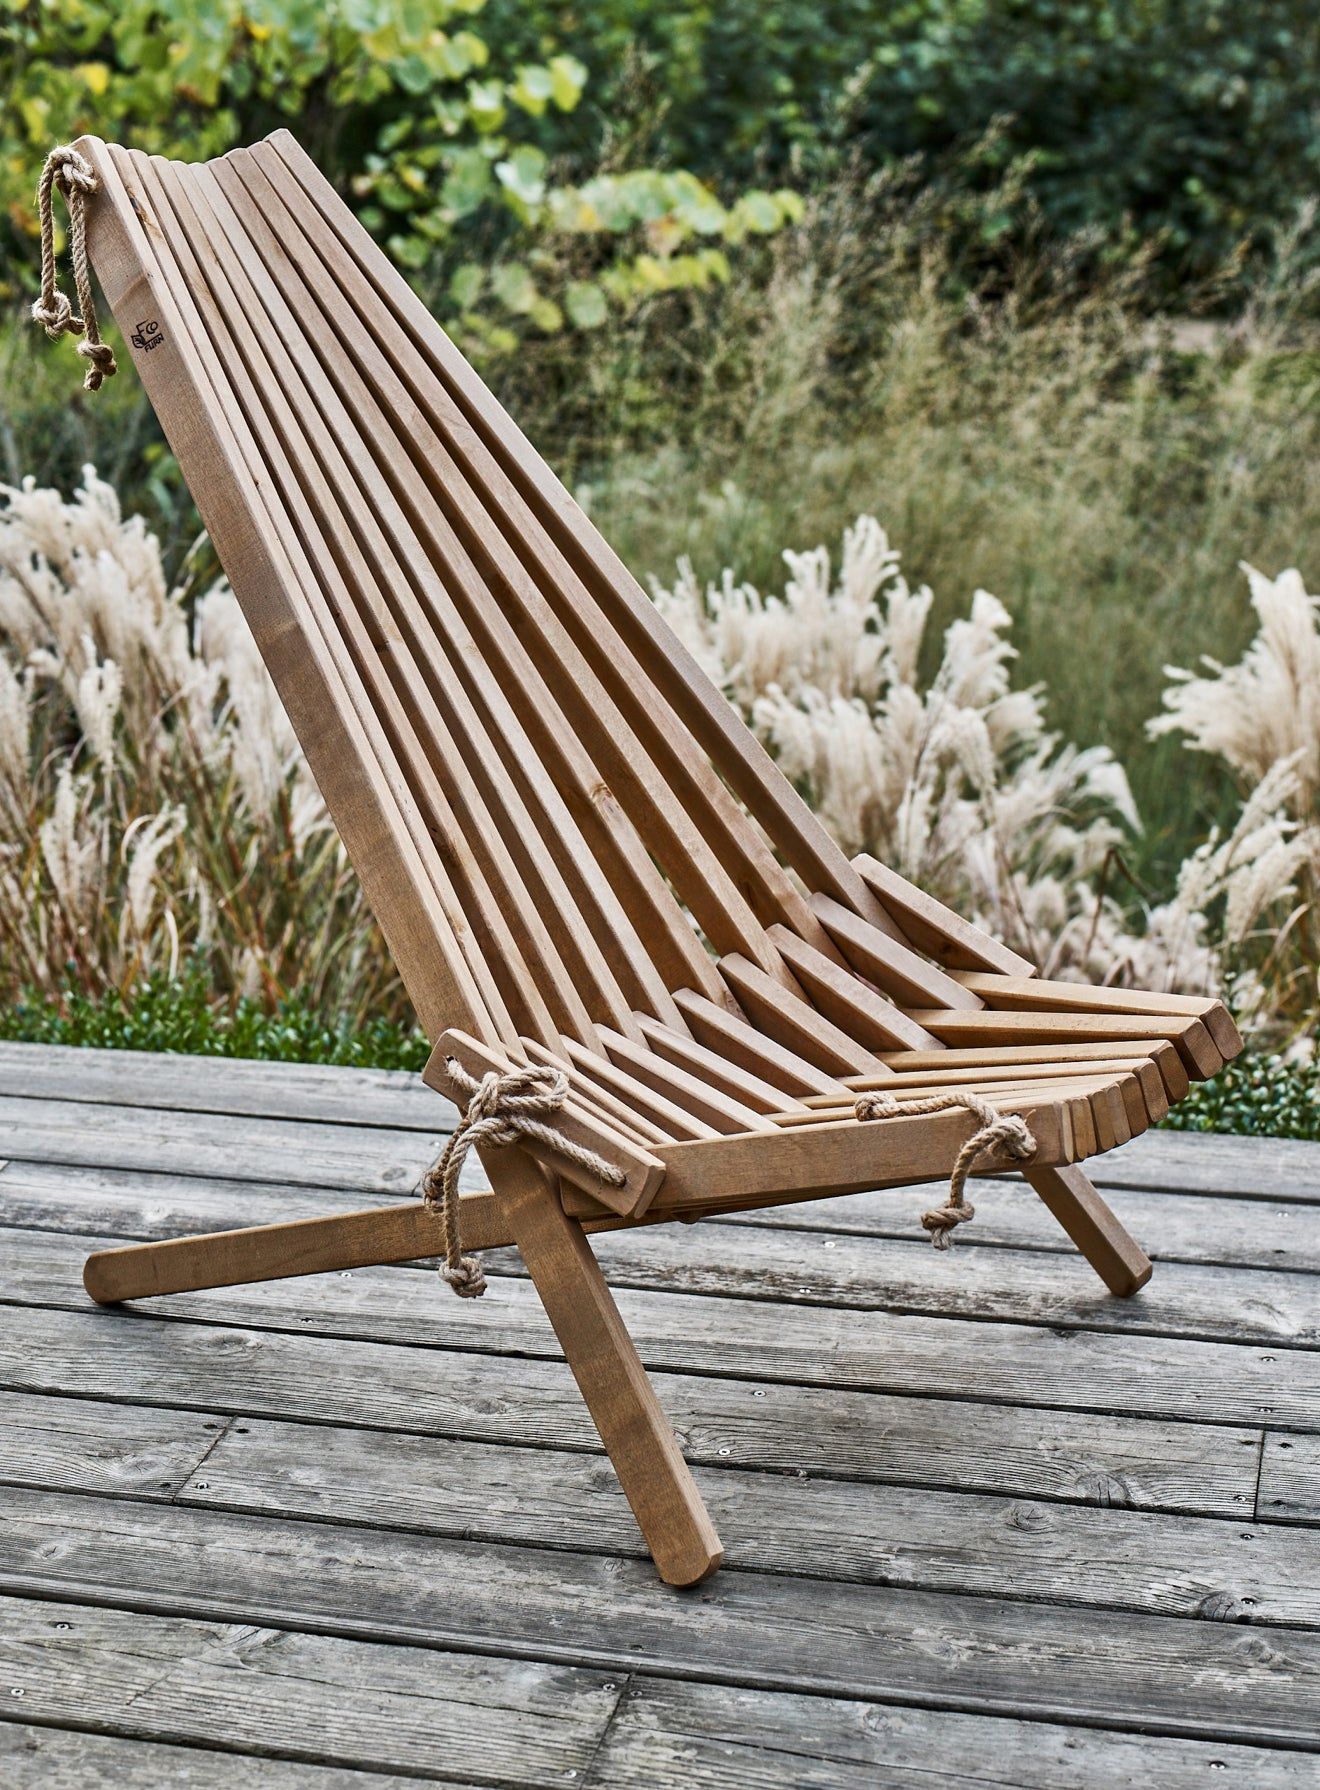 Discover the Beauty of Wooden Garden Chairs for Your Outdoor Oasis